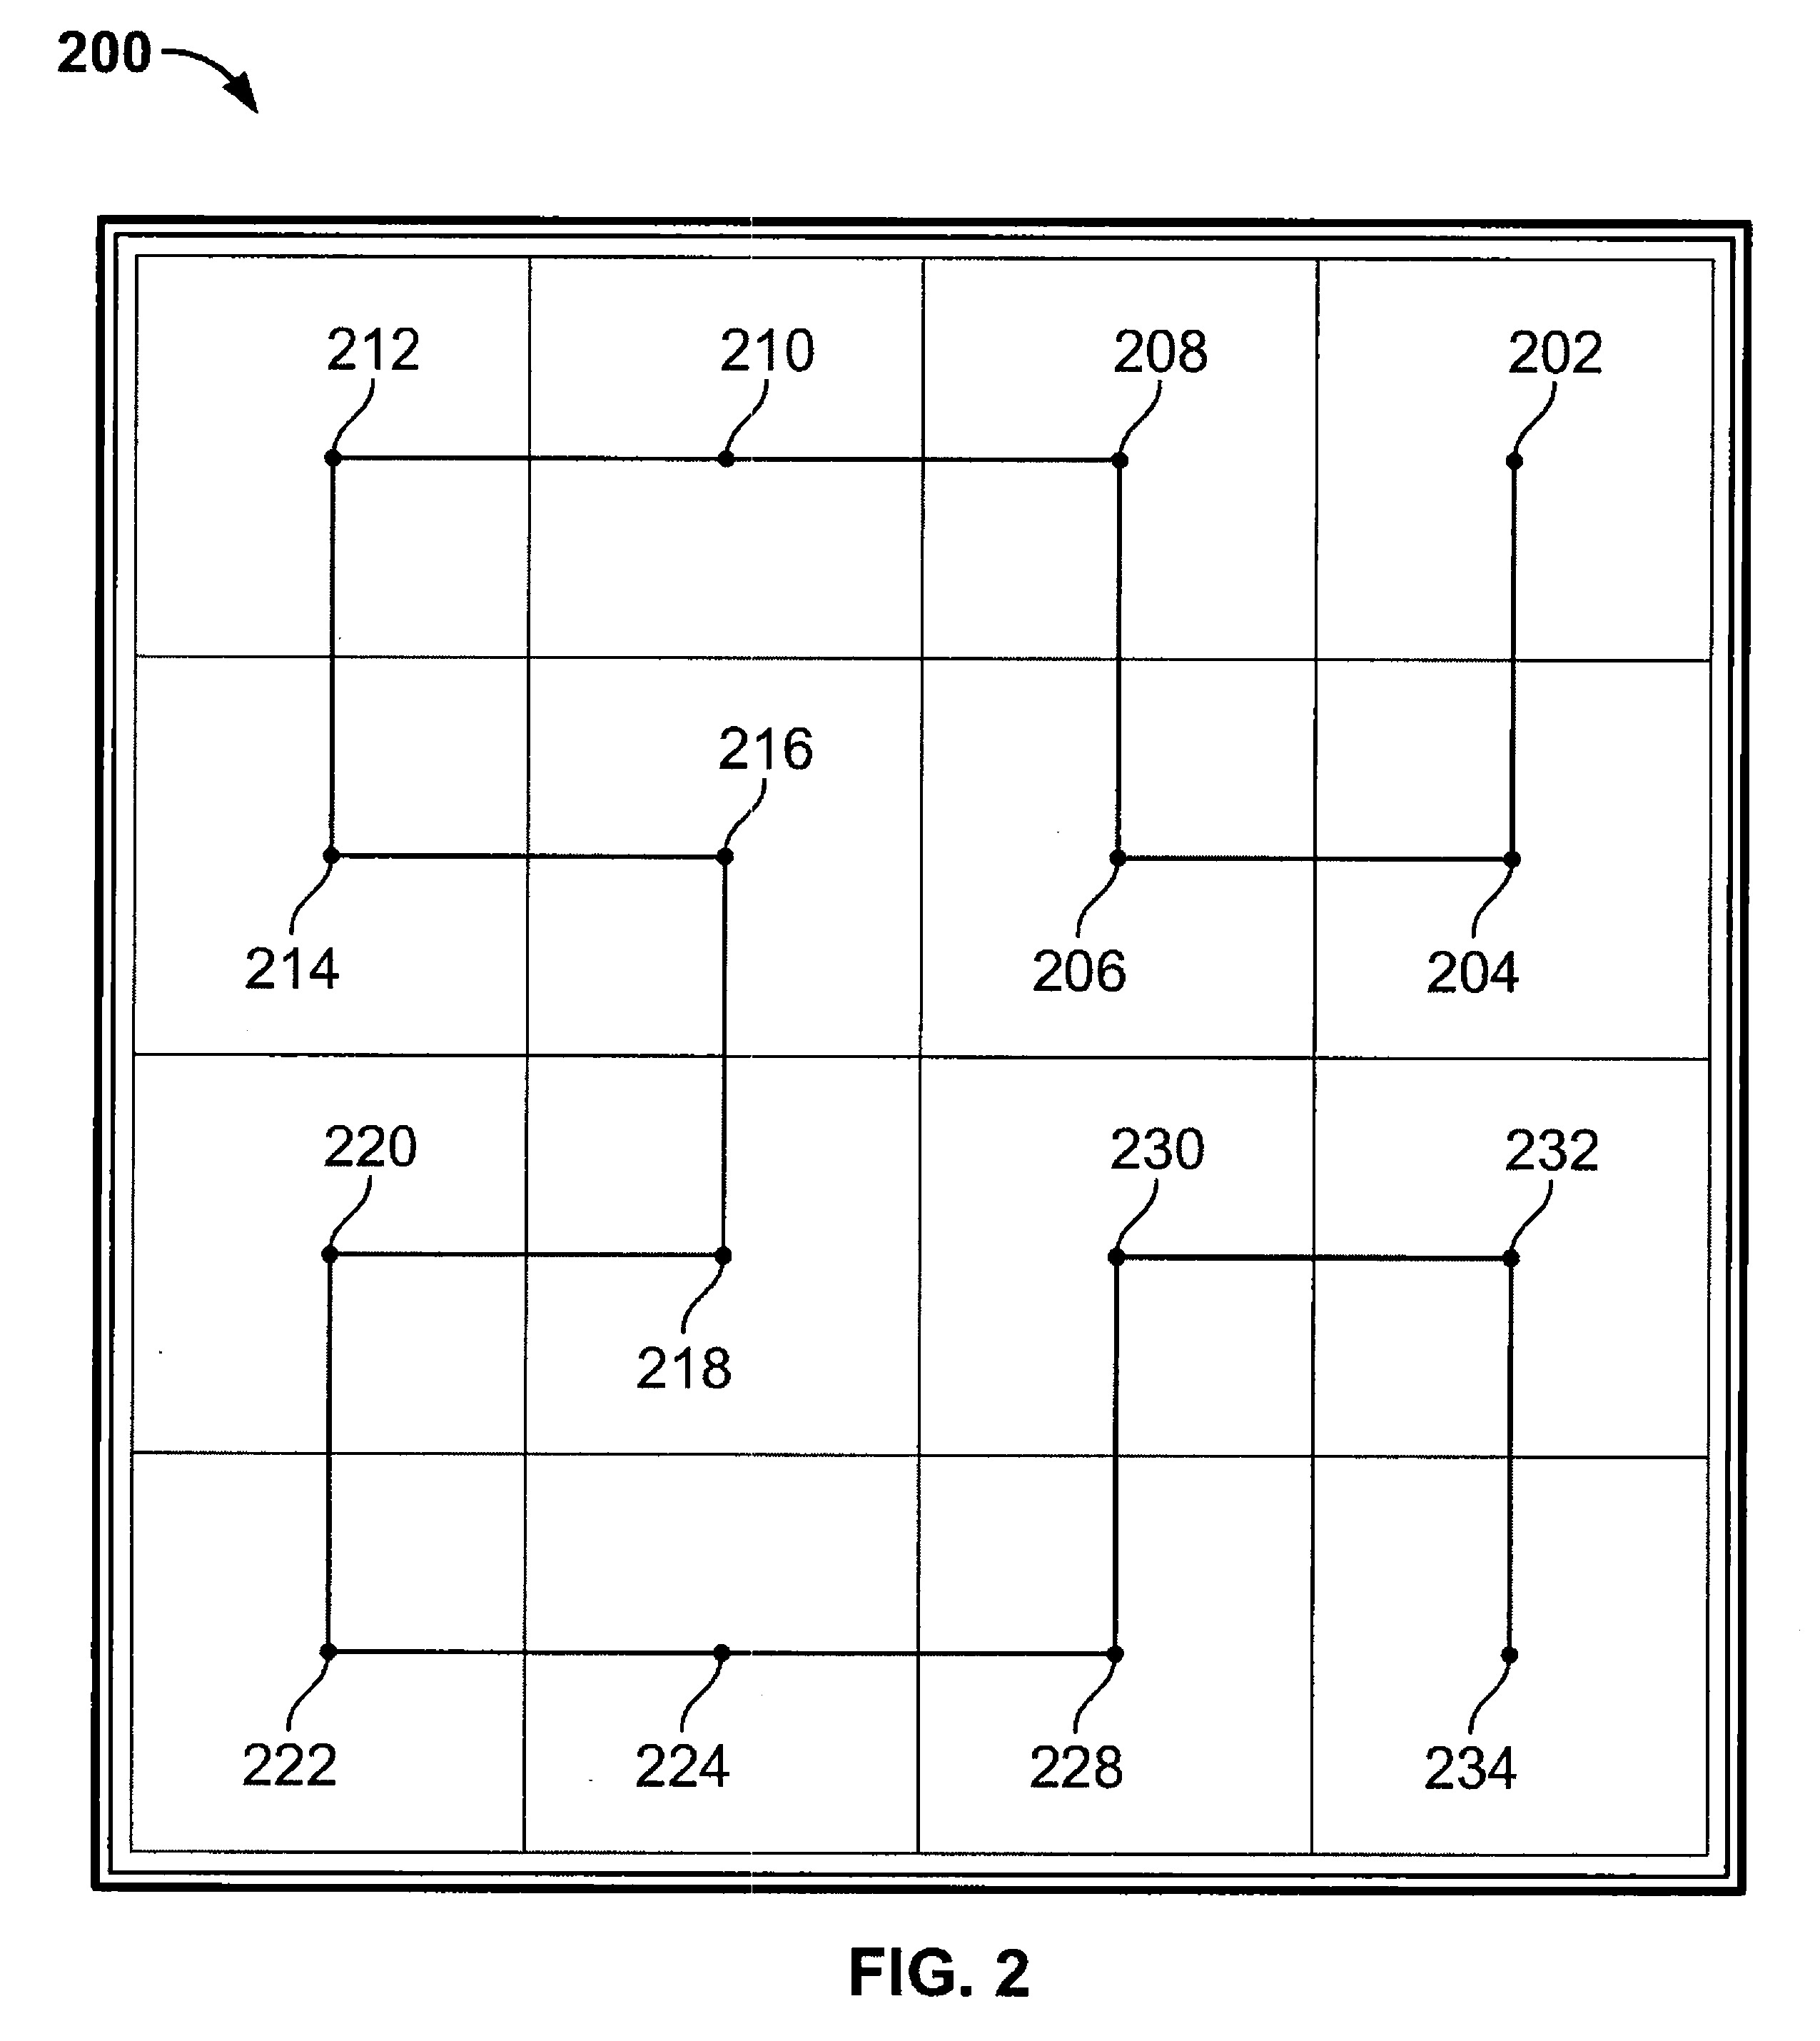 Compact clustered 2-D layout